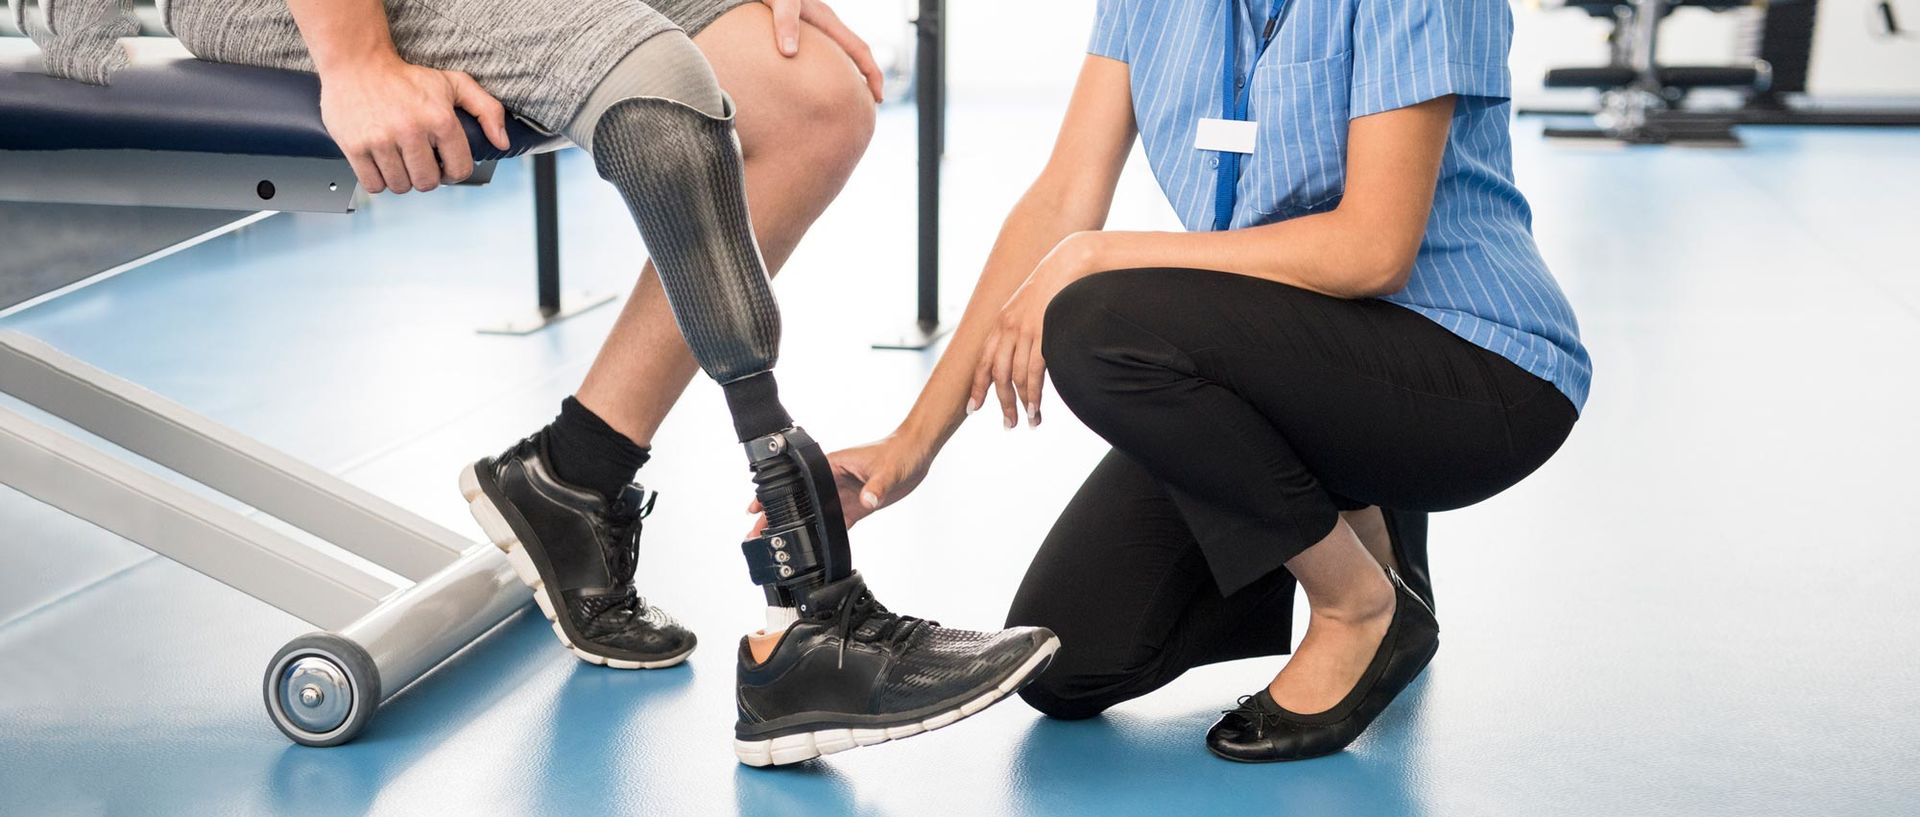 Certificate in Basics of Applied Prosthetics and Orthotics